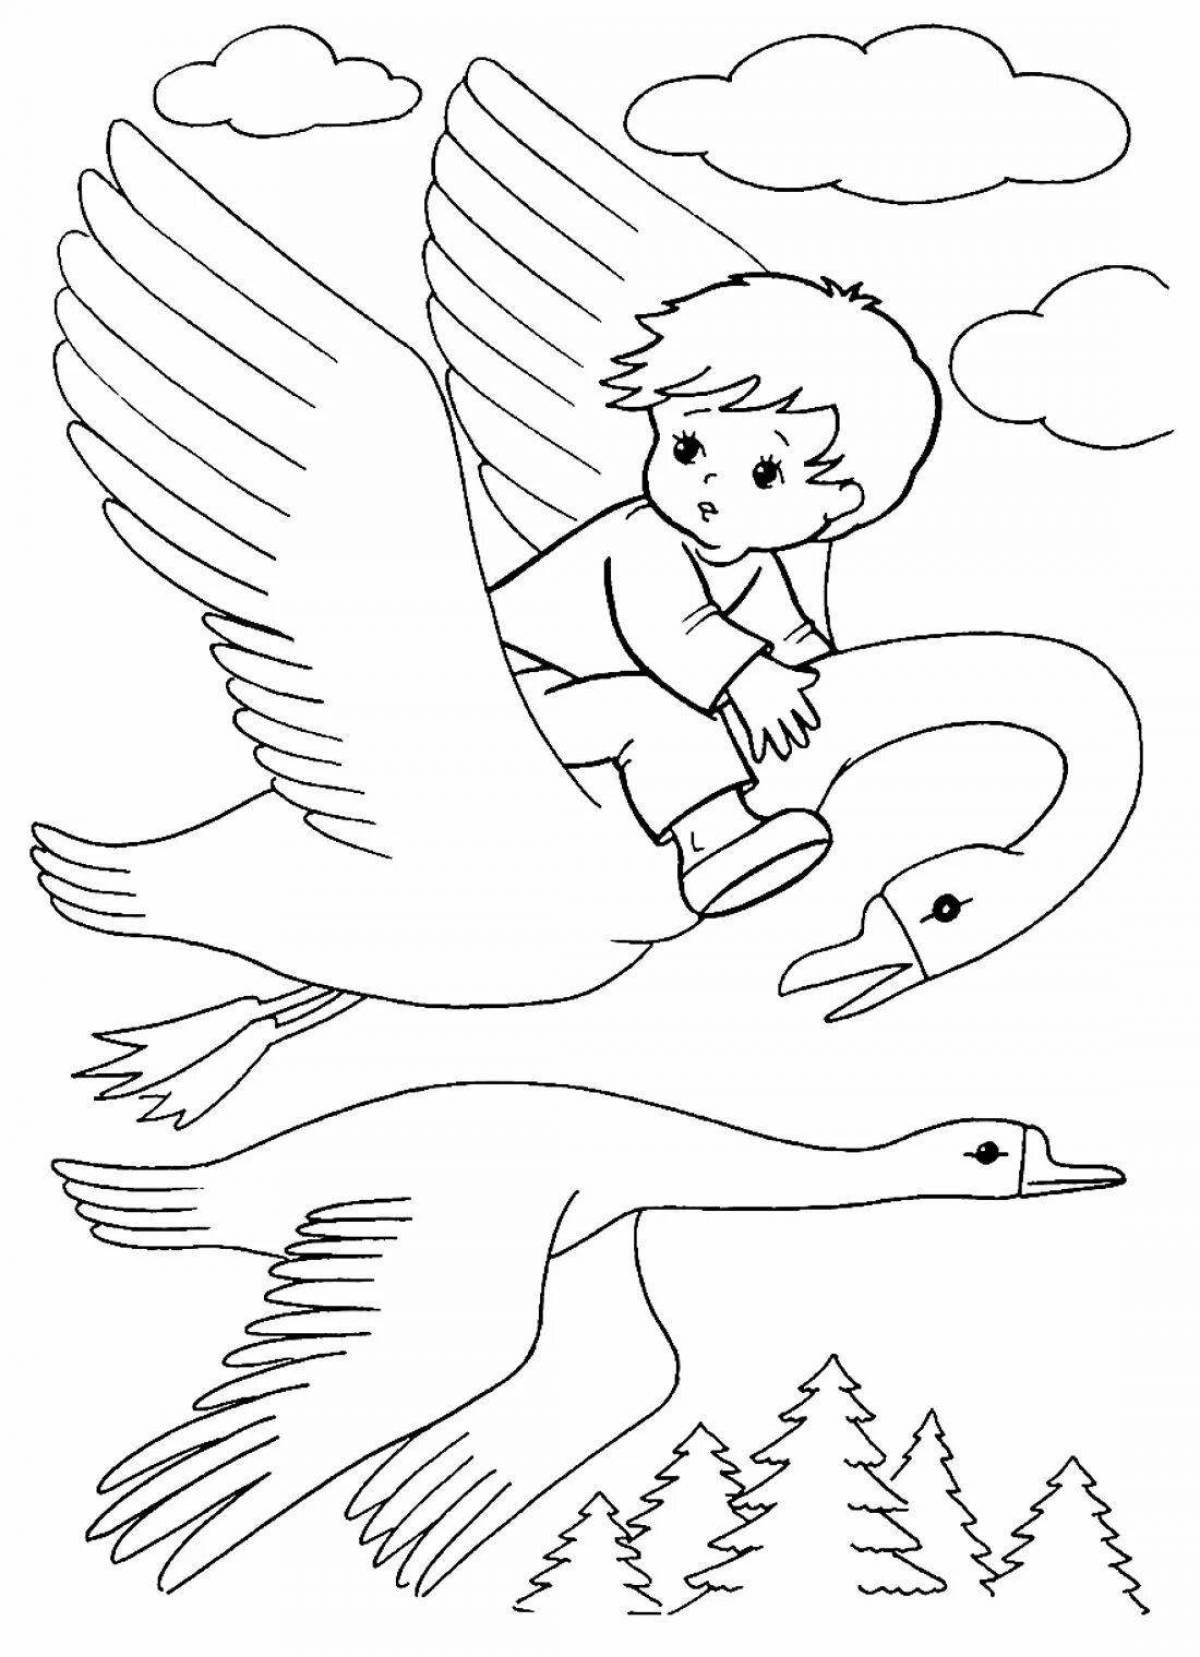 Great geese and swans coloring pages for kids